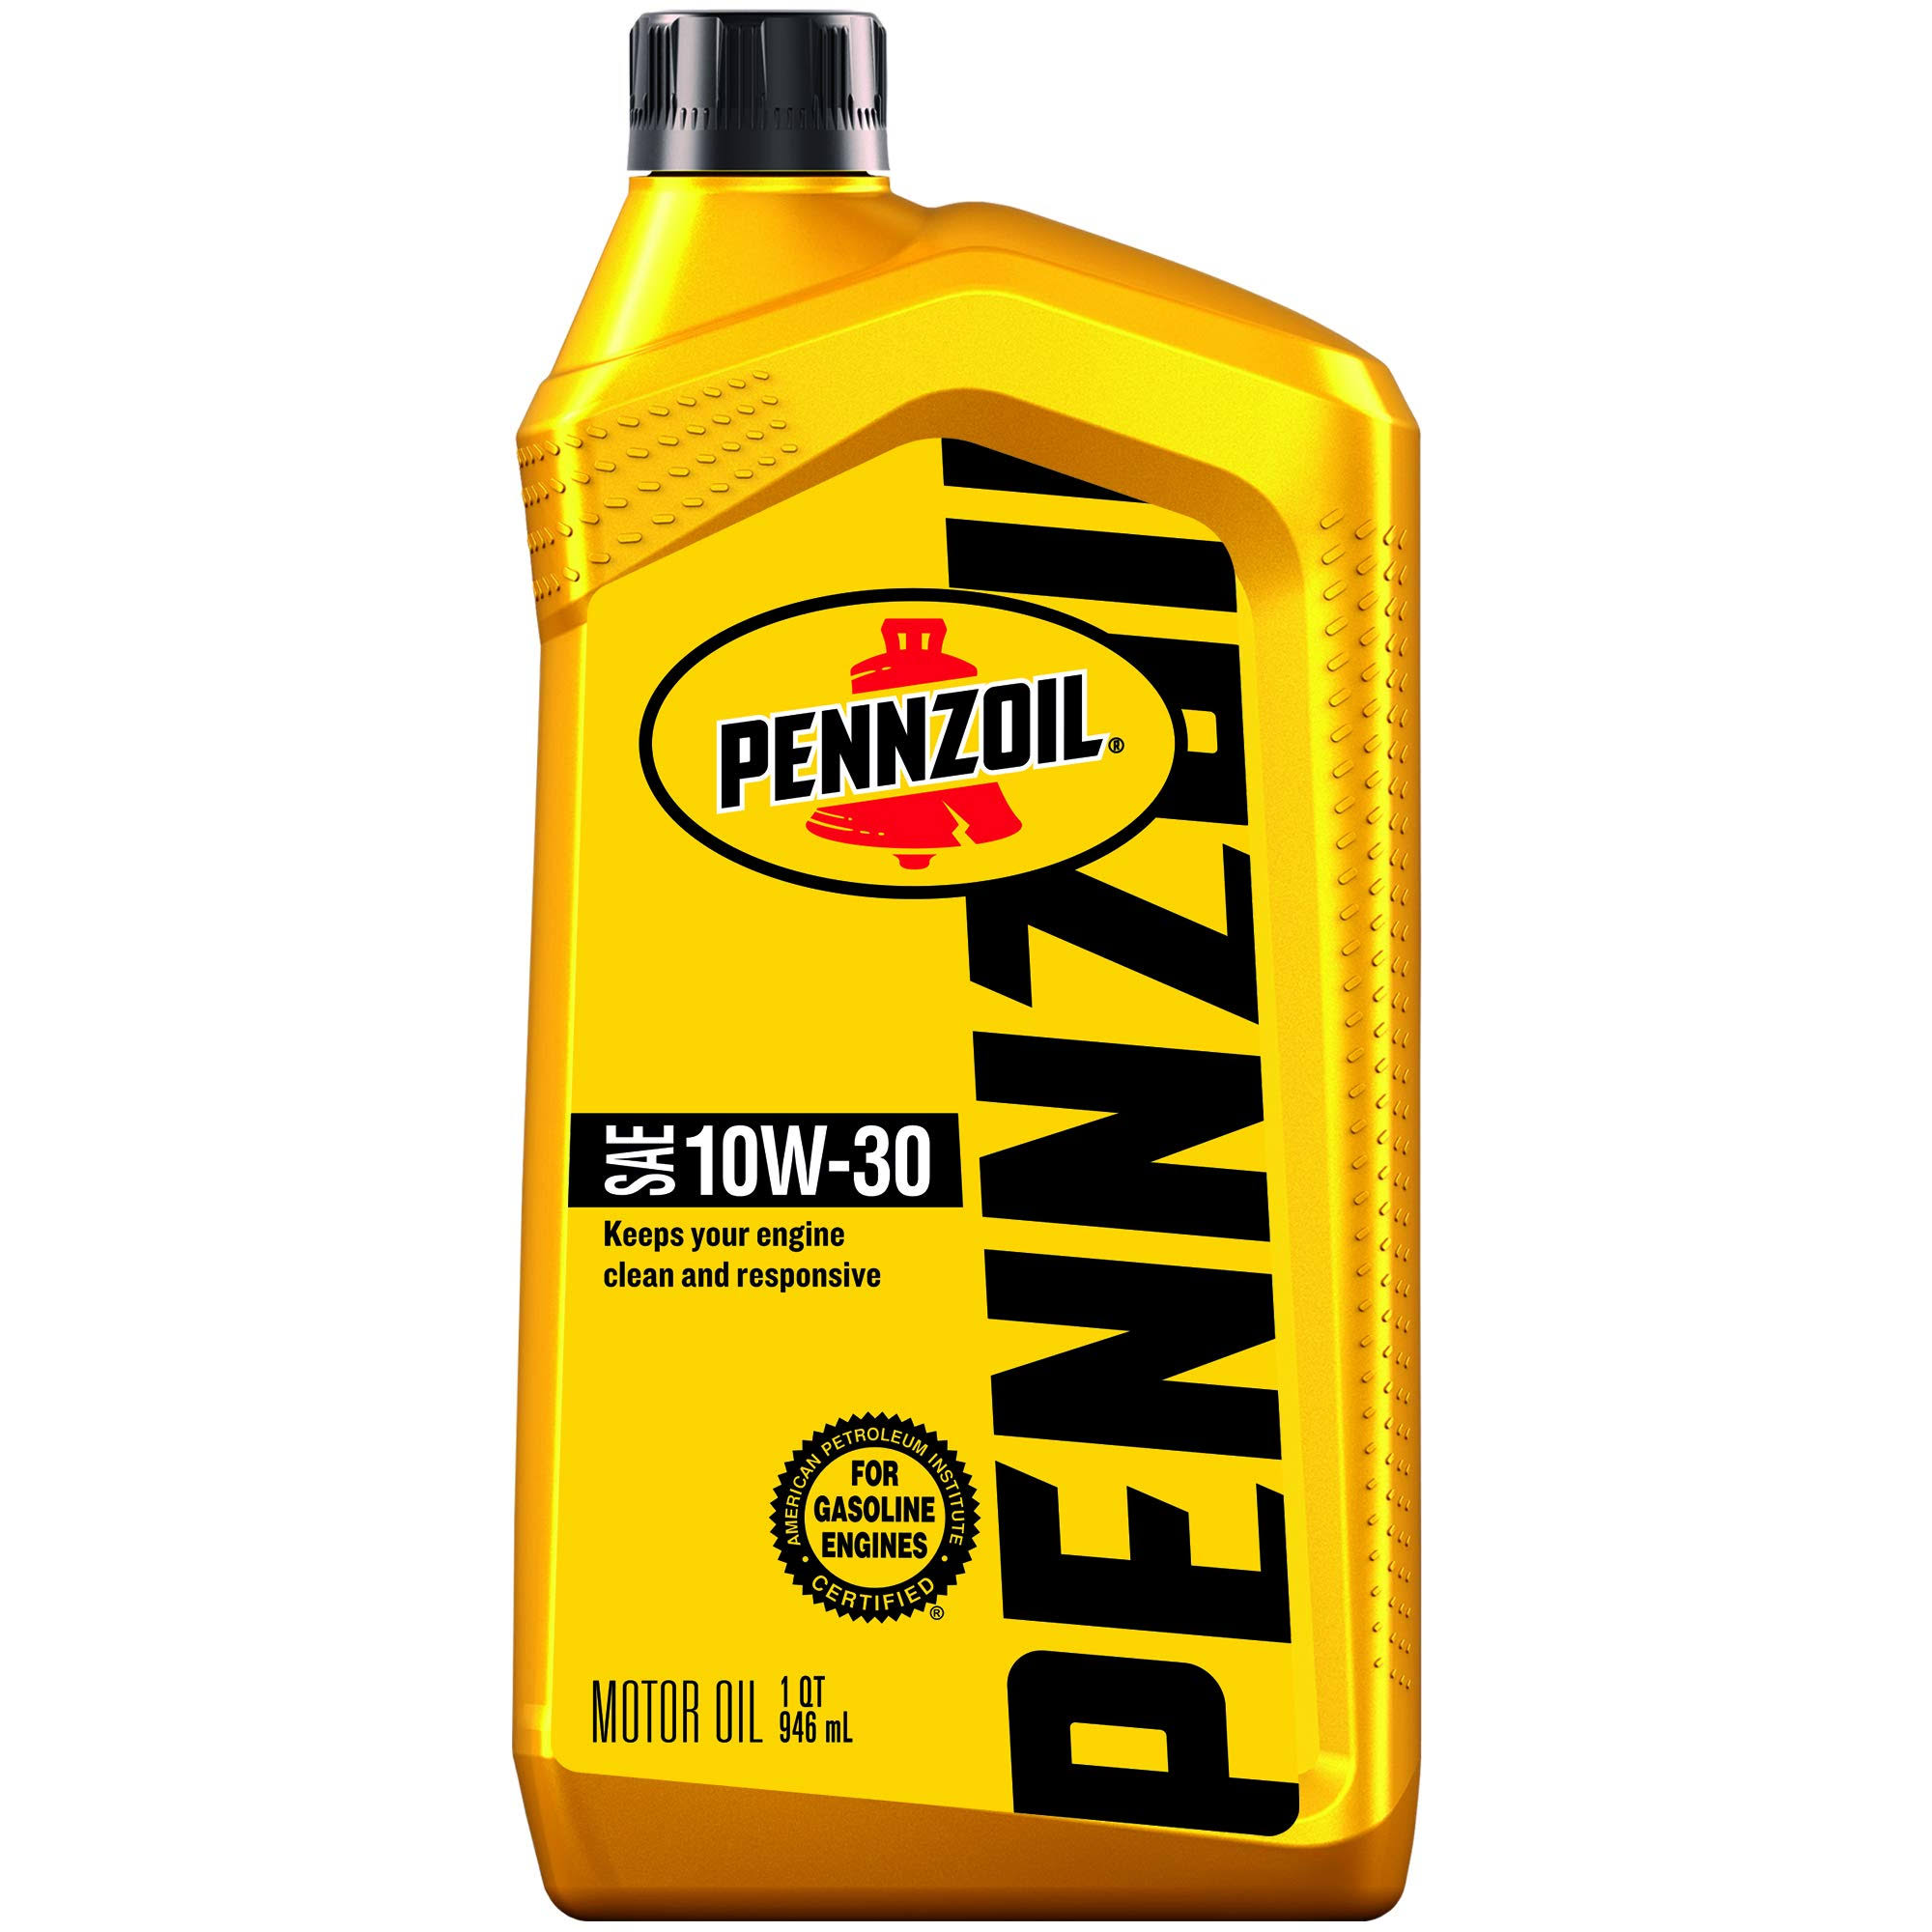 Pennzoil Active Cleansing Agents SAE 10W-30 Motor Oil - 1qt